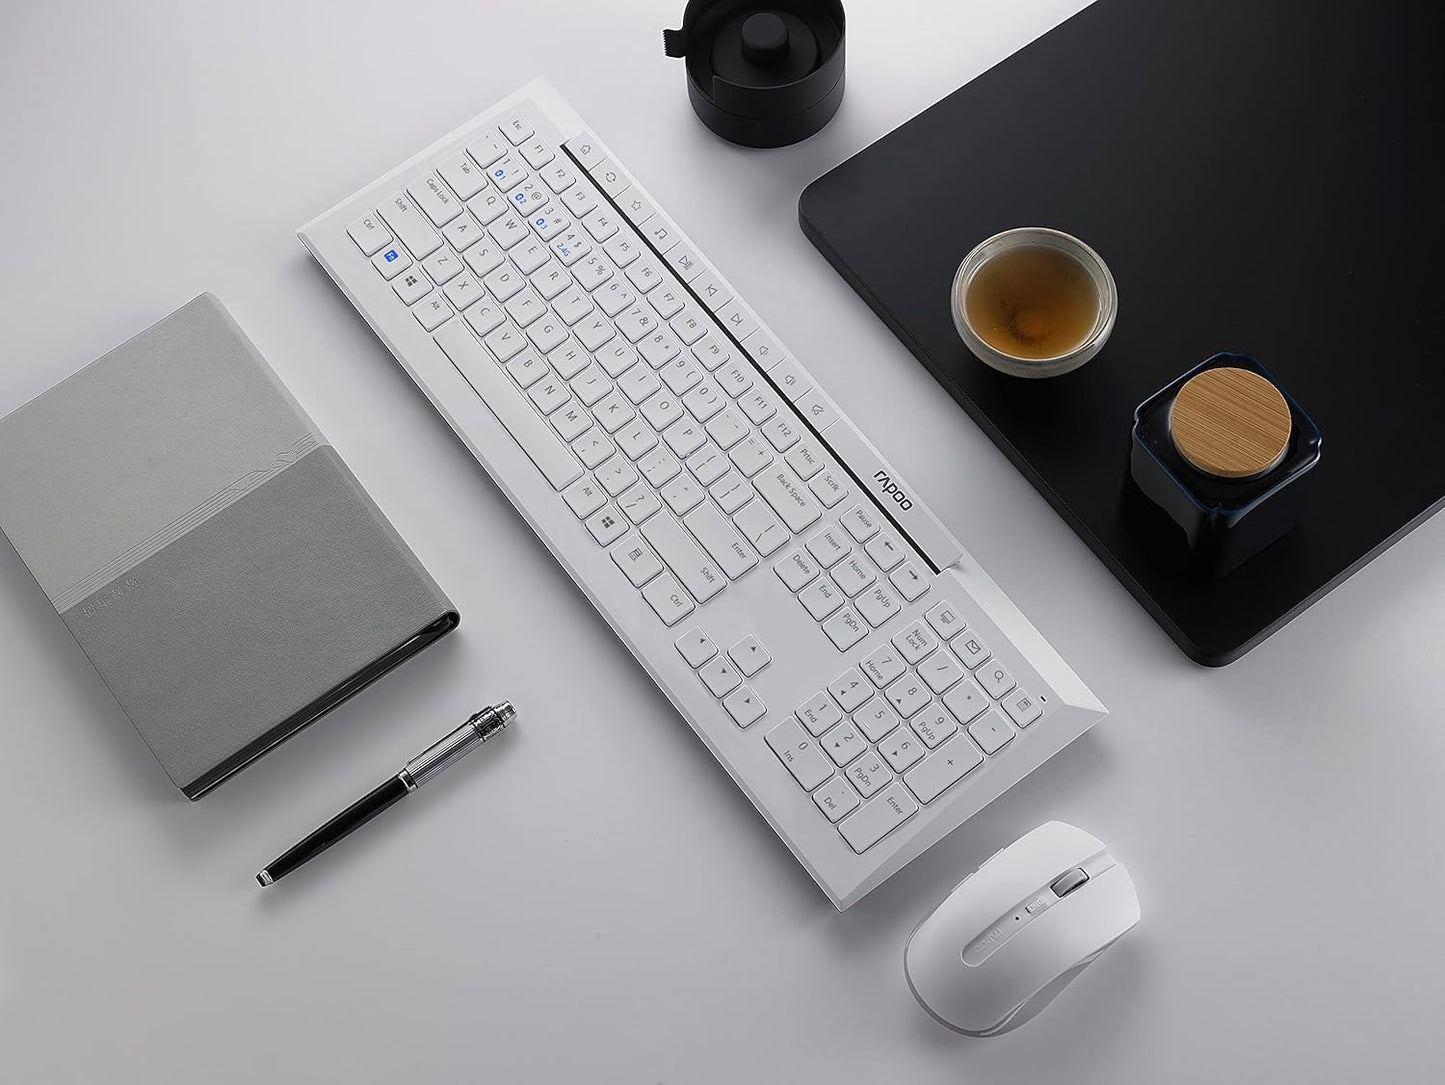 RAPOO 8210M Wireless Keyboard and Mouse Combo, Multi-mode connectivity connect up to 3 Devices simultaneously, BT5.0, BT 3.0 and 2.4 G | Adjustable DPI Optical Mouse English/Arabic Layout (White) - CaveHubs